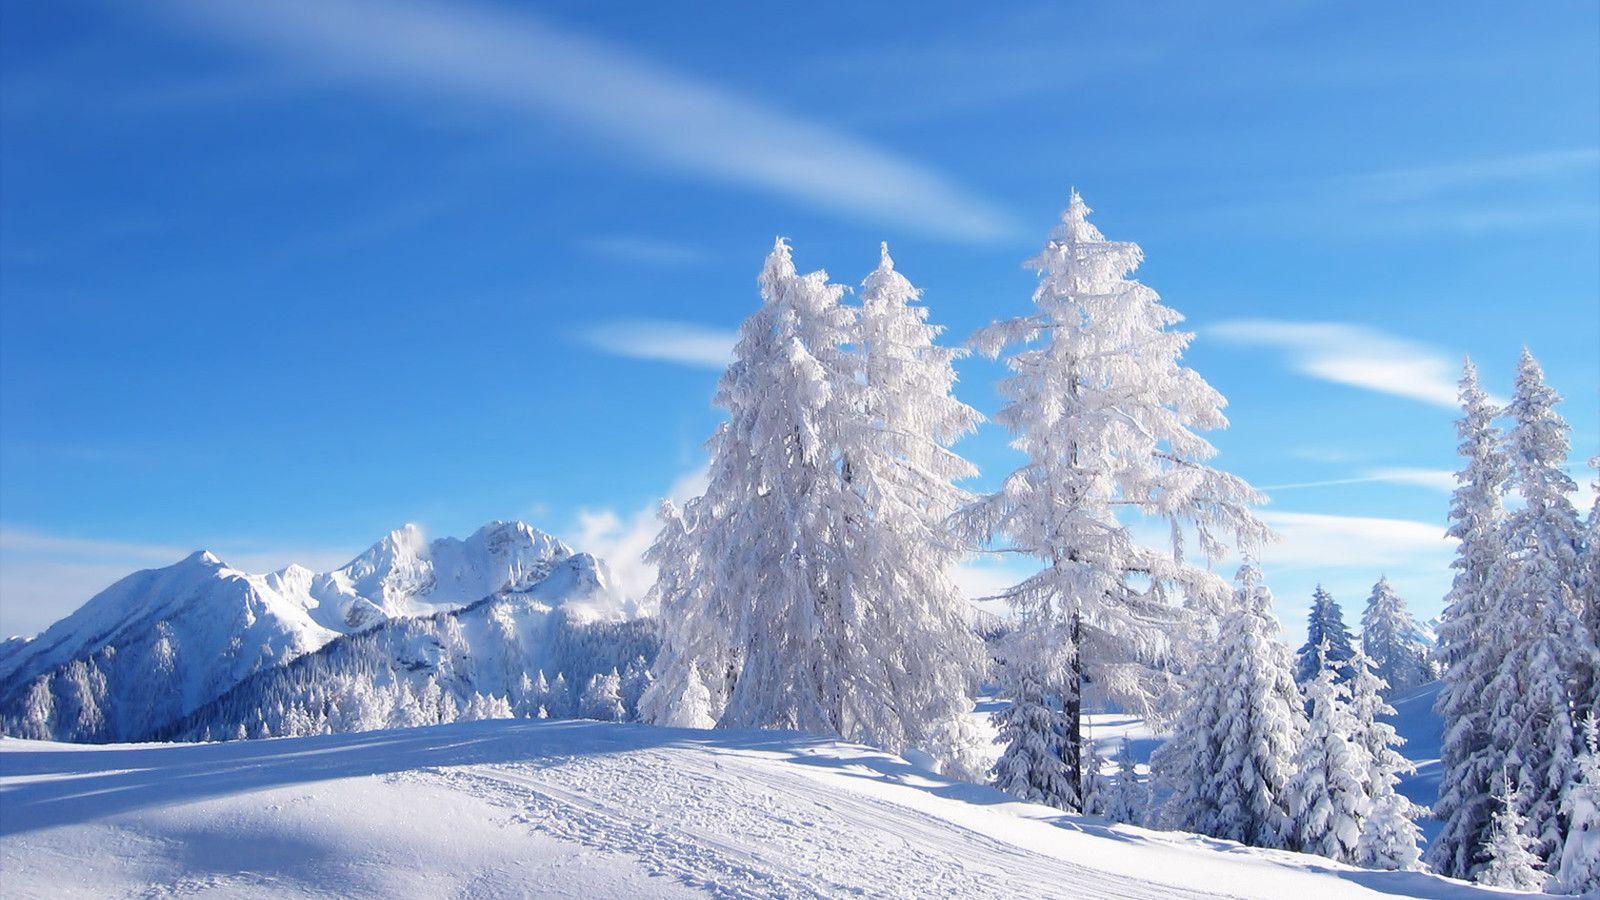 winter background images hd